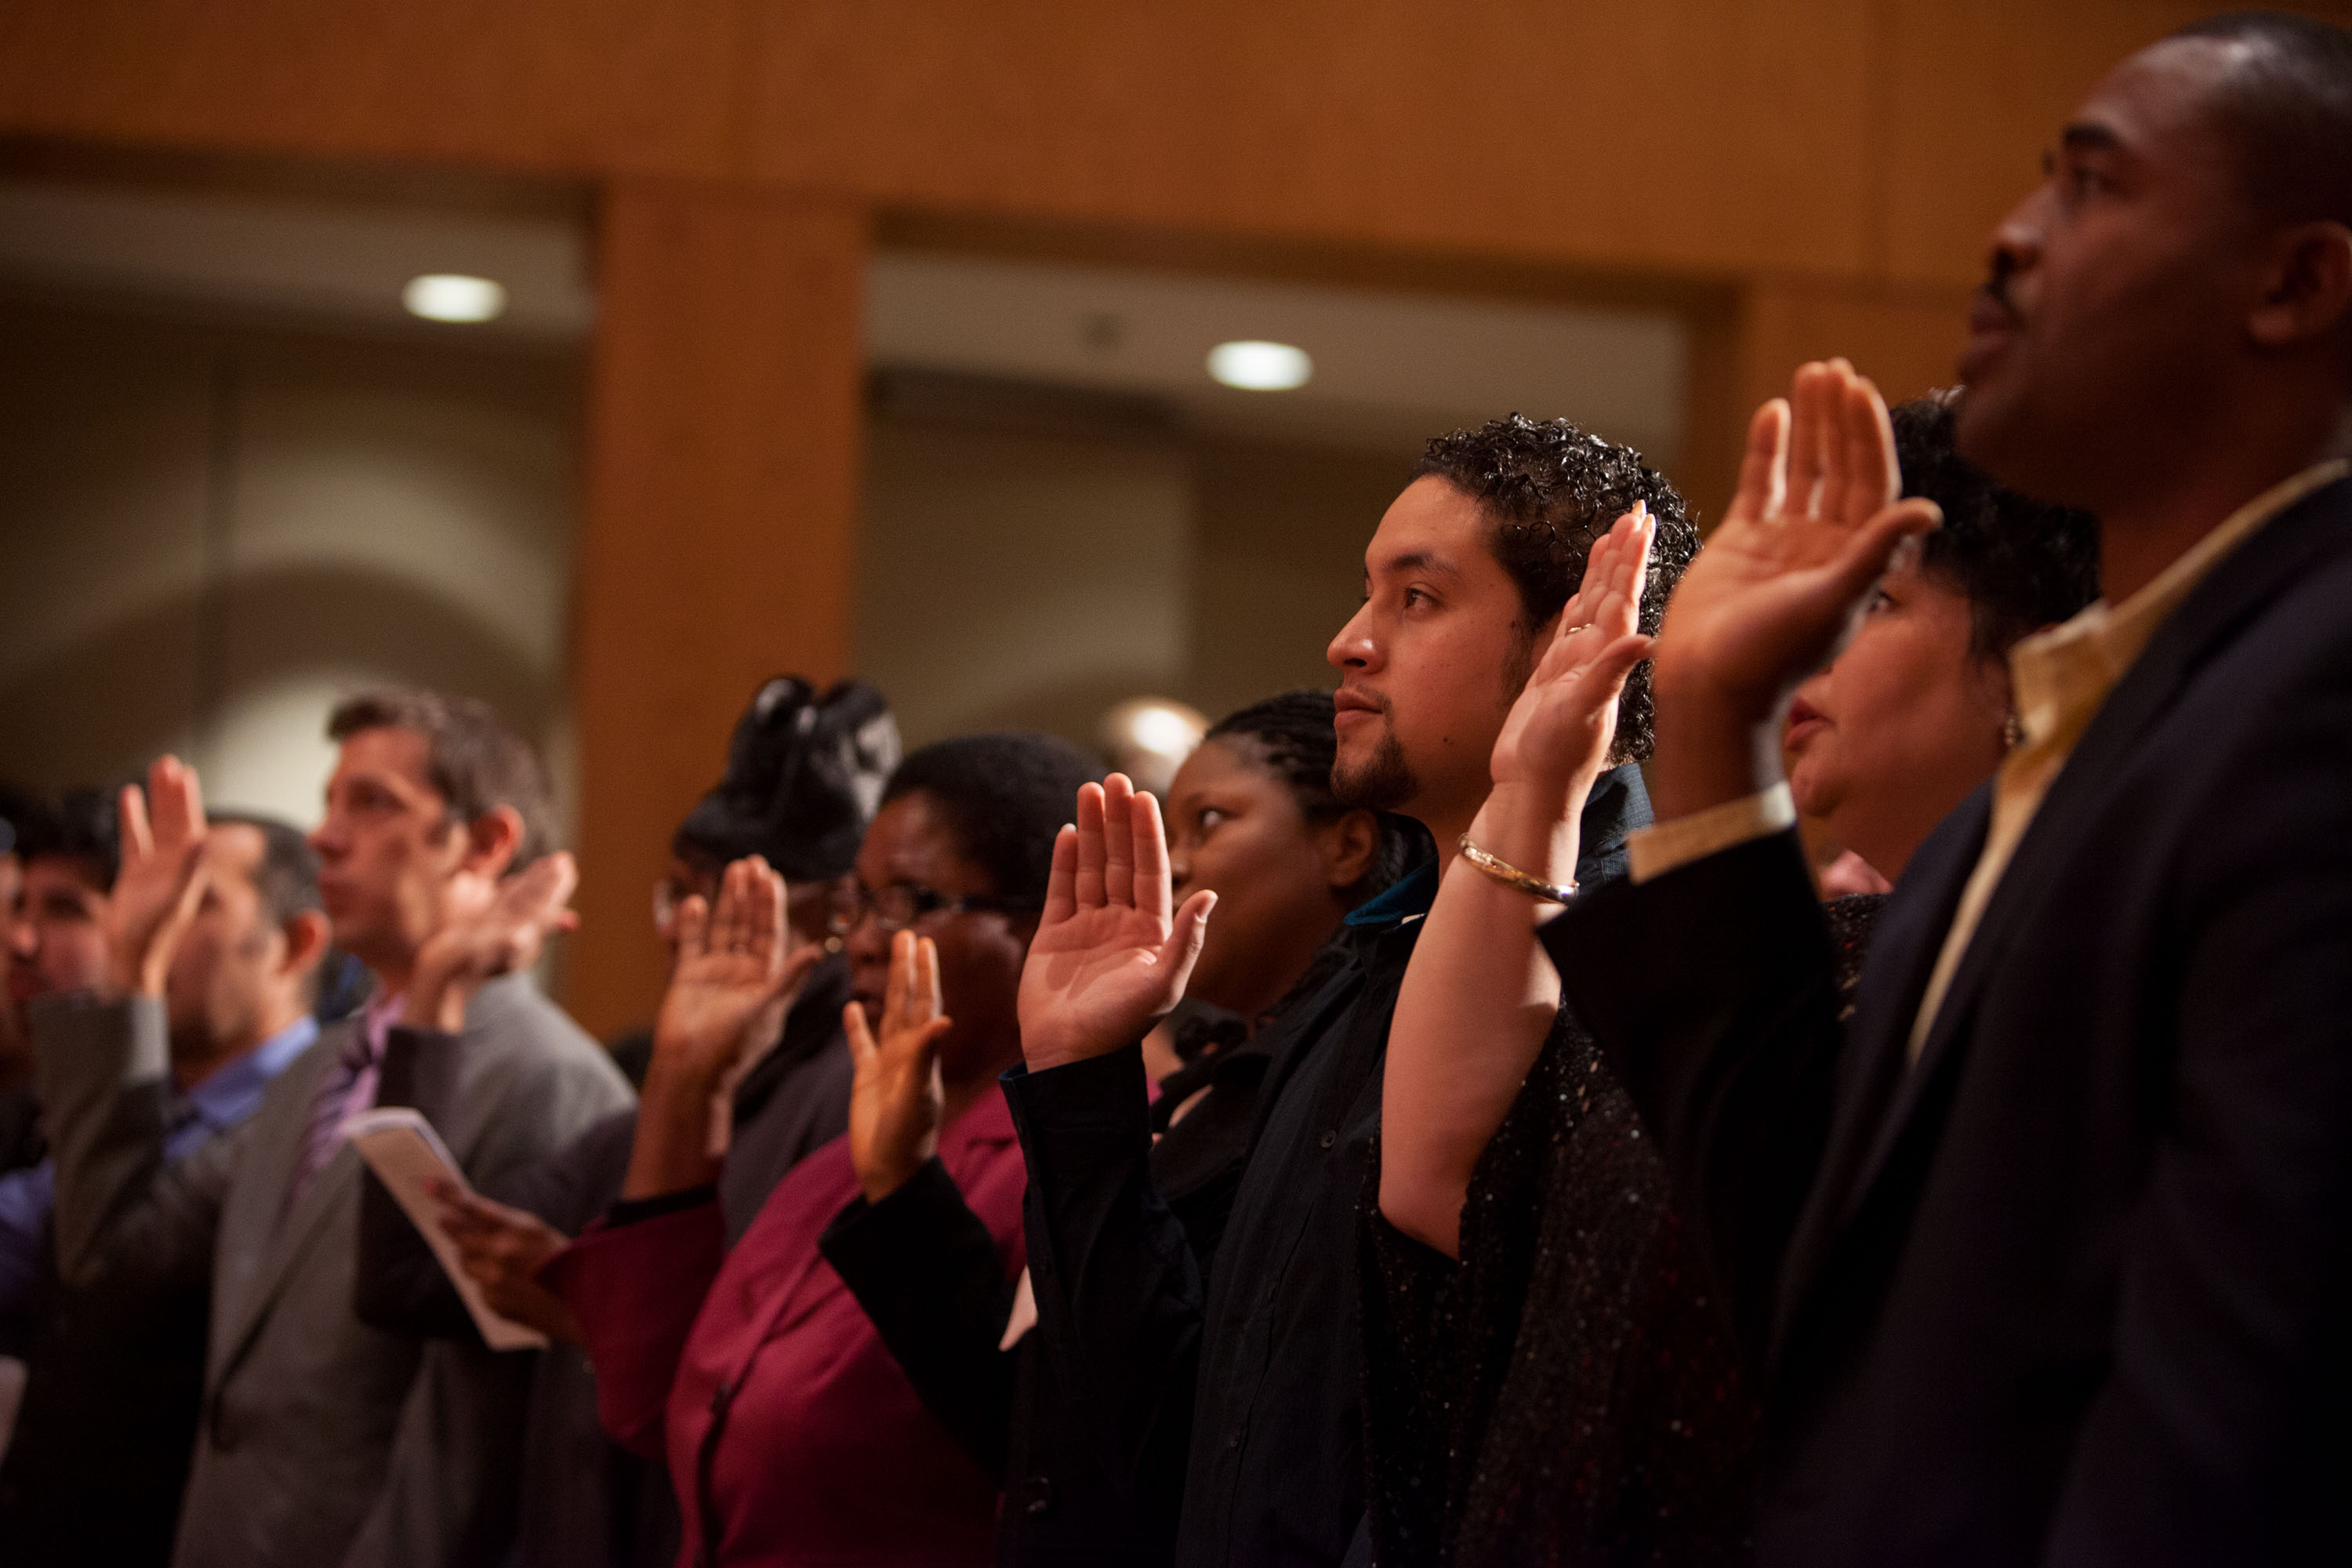 New U.S. Citizens take the oath of allegiance during a naturalization ceremony 